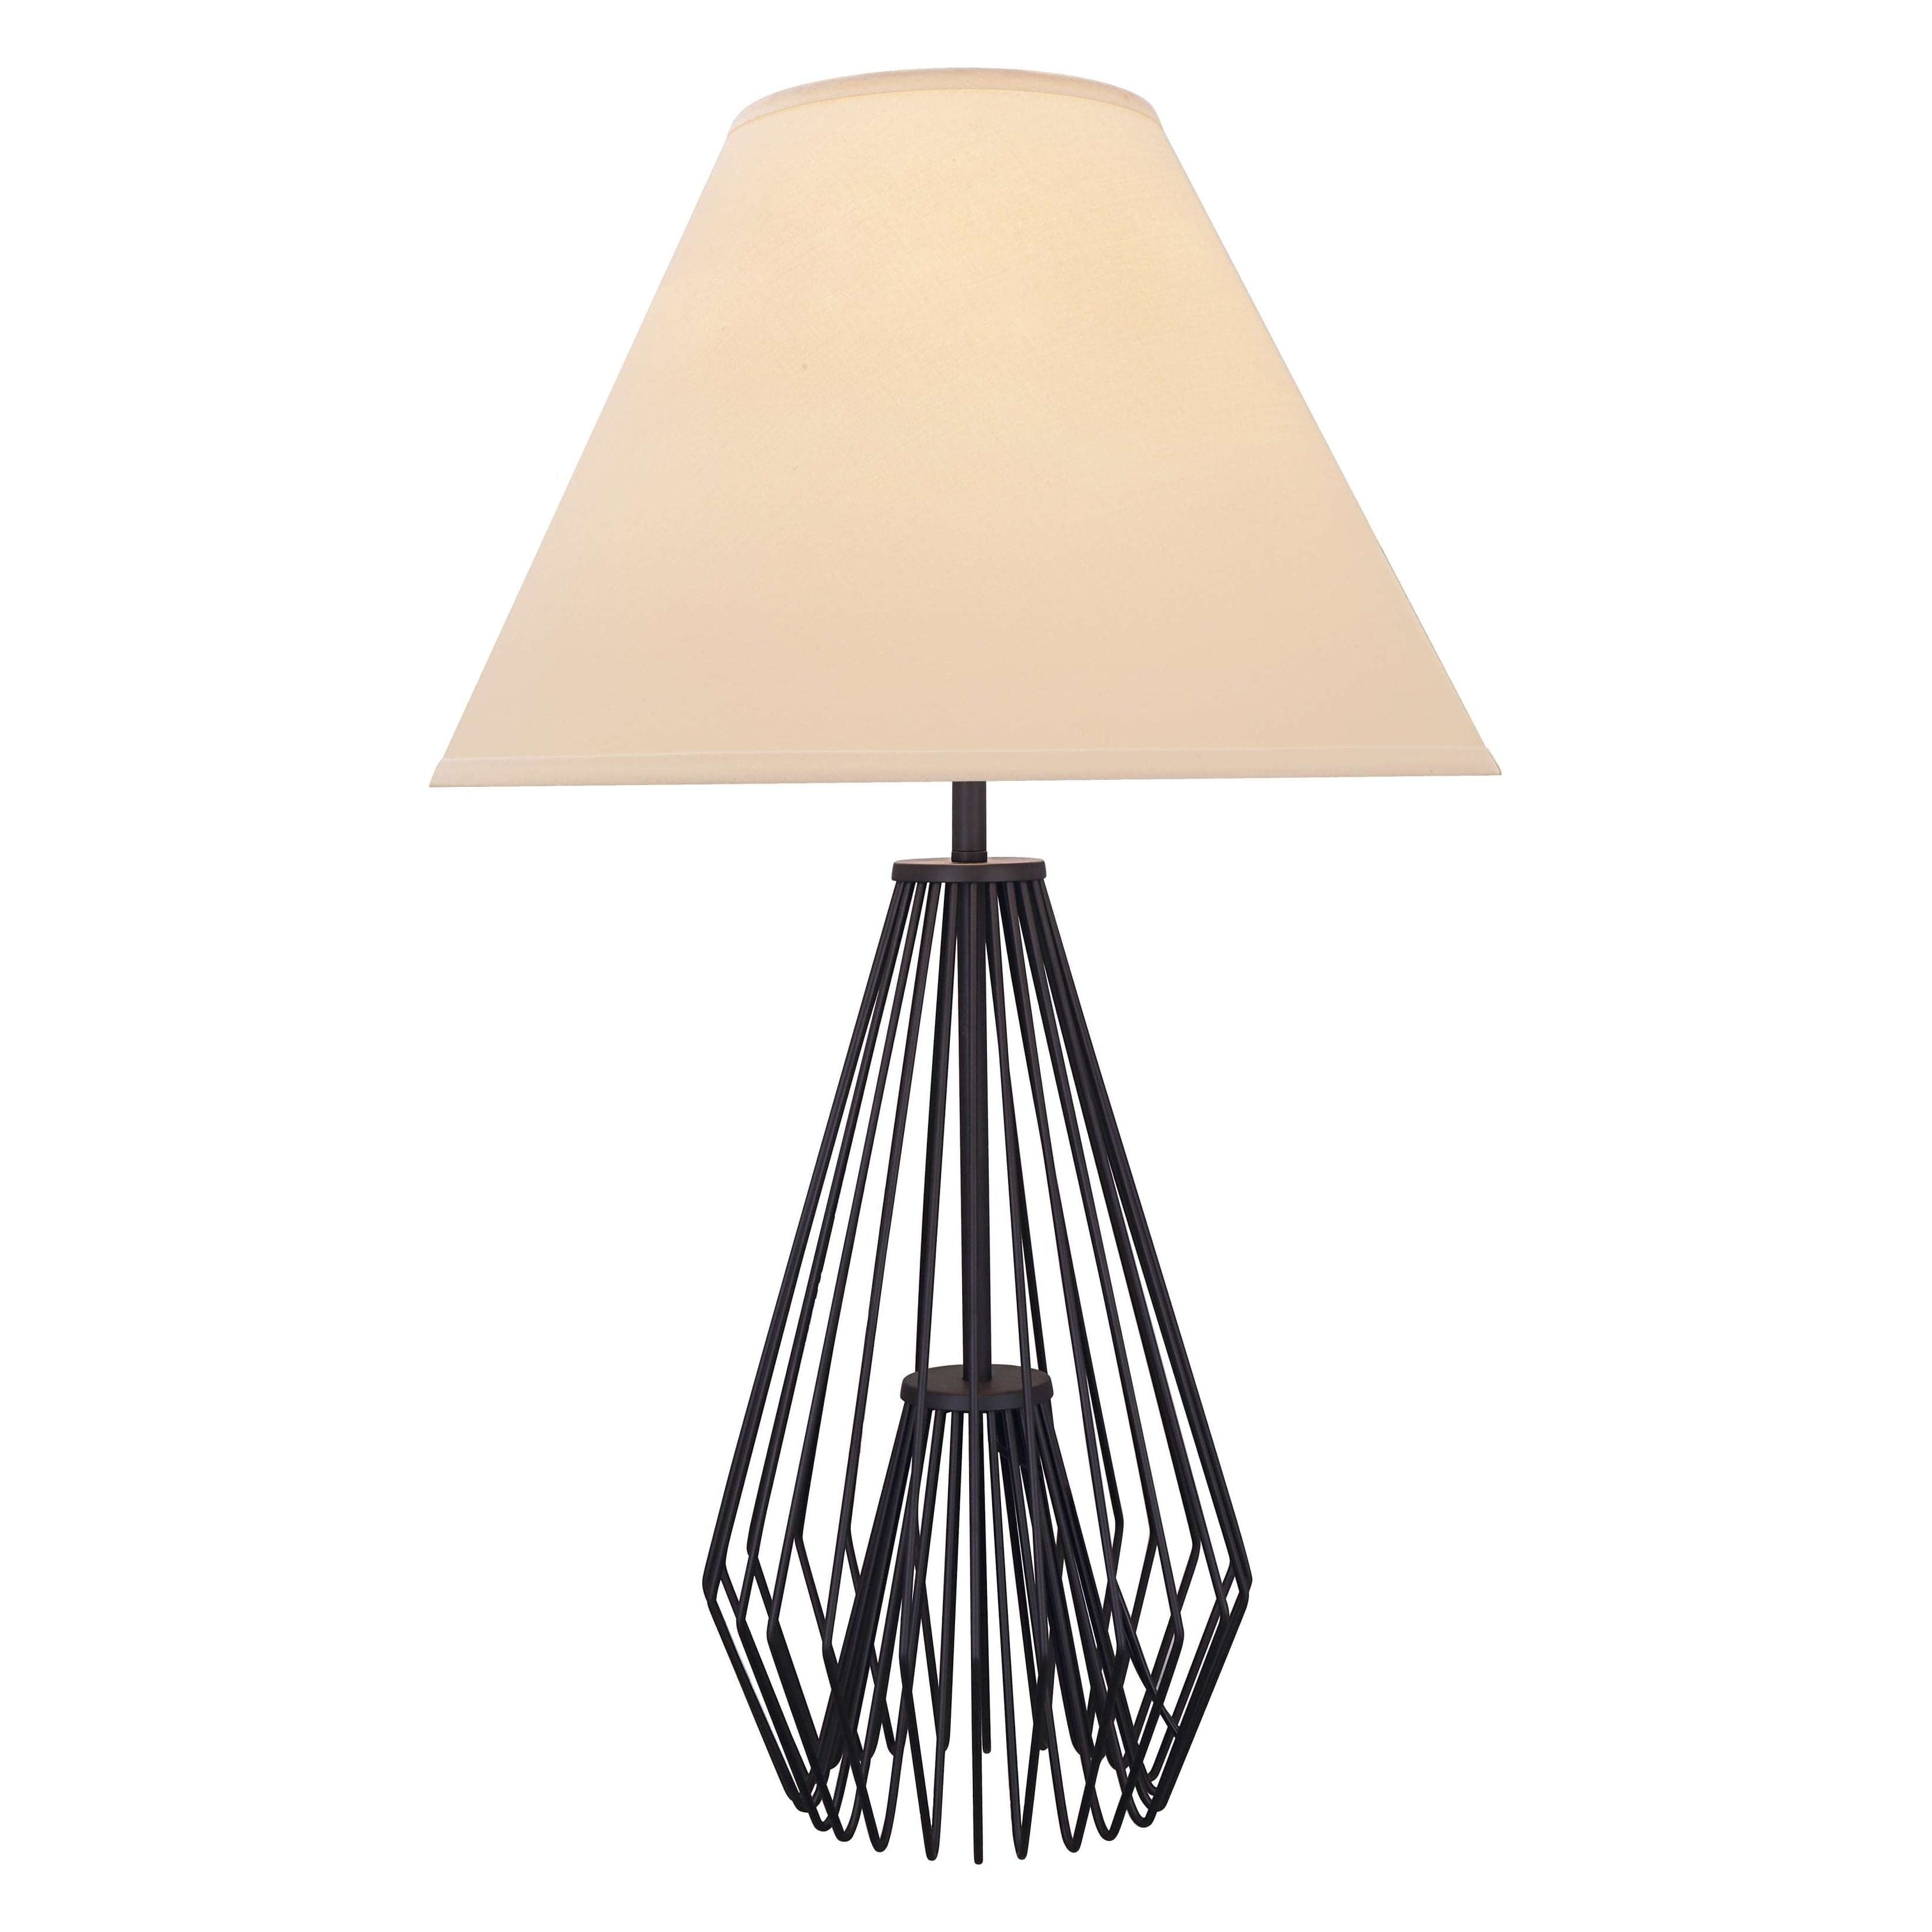 Benzara Modern Flared Empire Shade Table Lamp With Caged Pattern, Black And Beige By Benzara Table Lamps BM207457